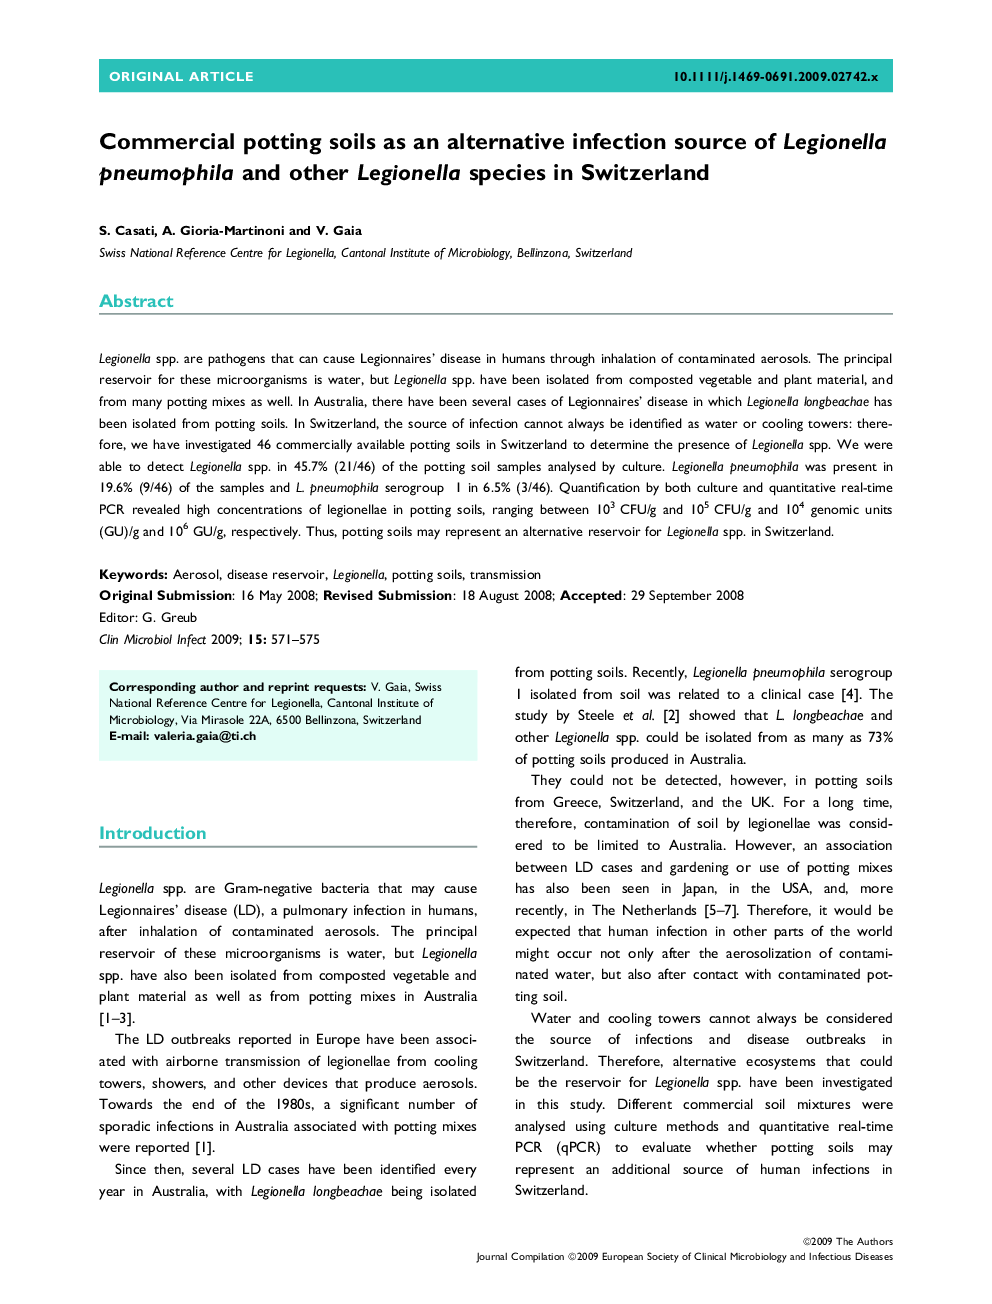 Commercial potting soils as an alternative infection source of Legionella pneumophila and other Legionella species in Switzerland 